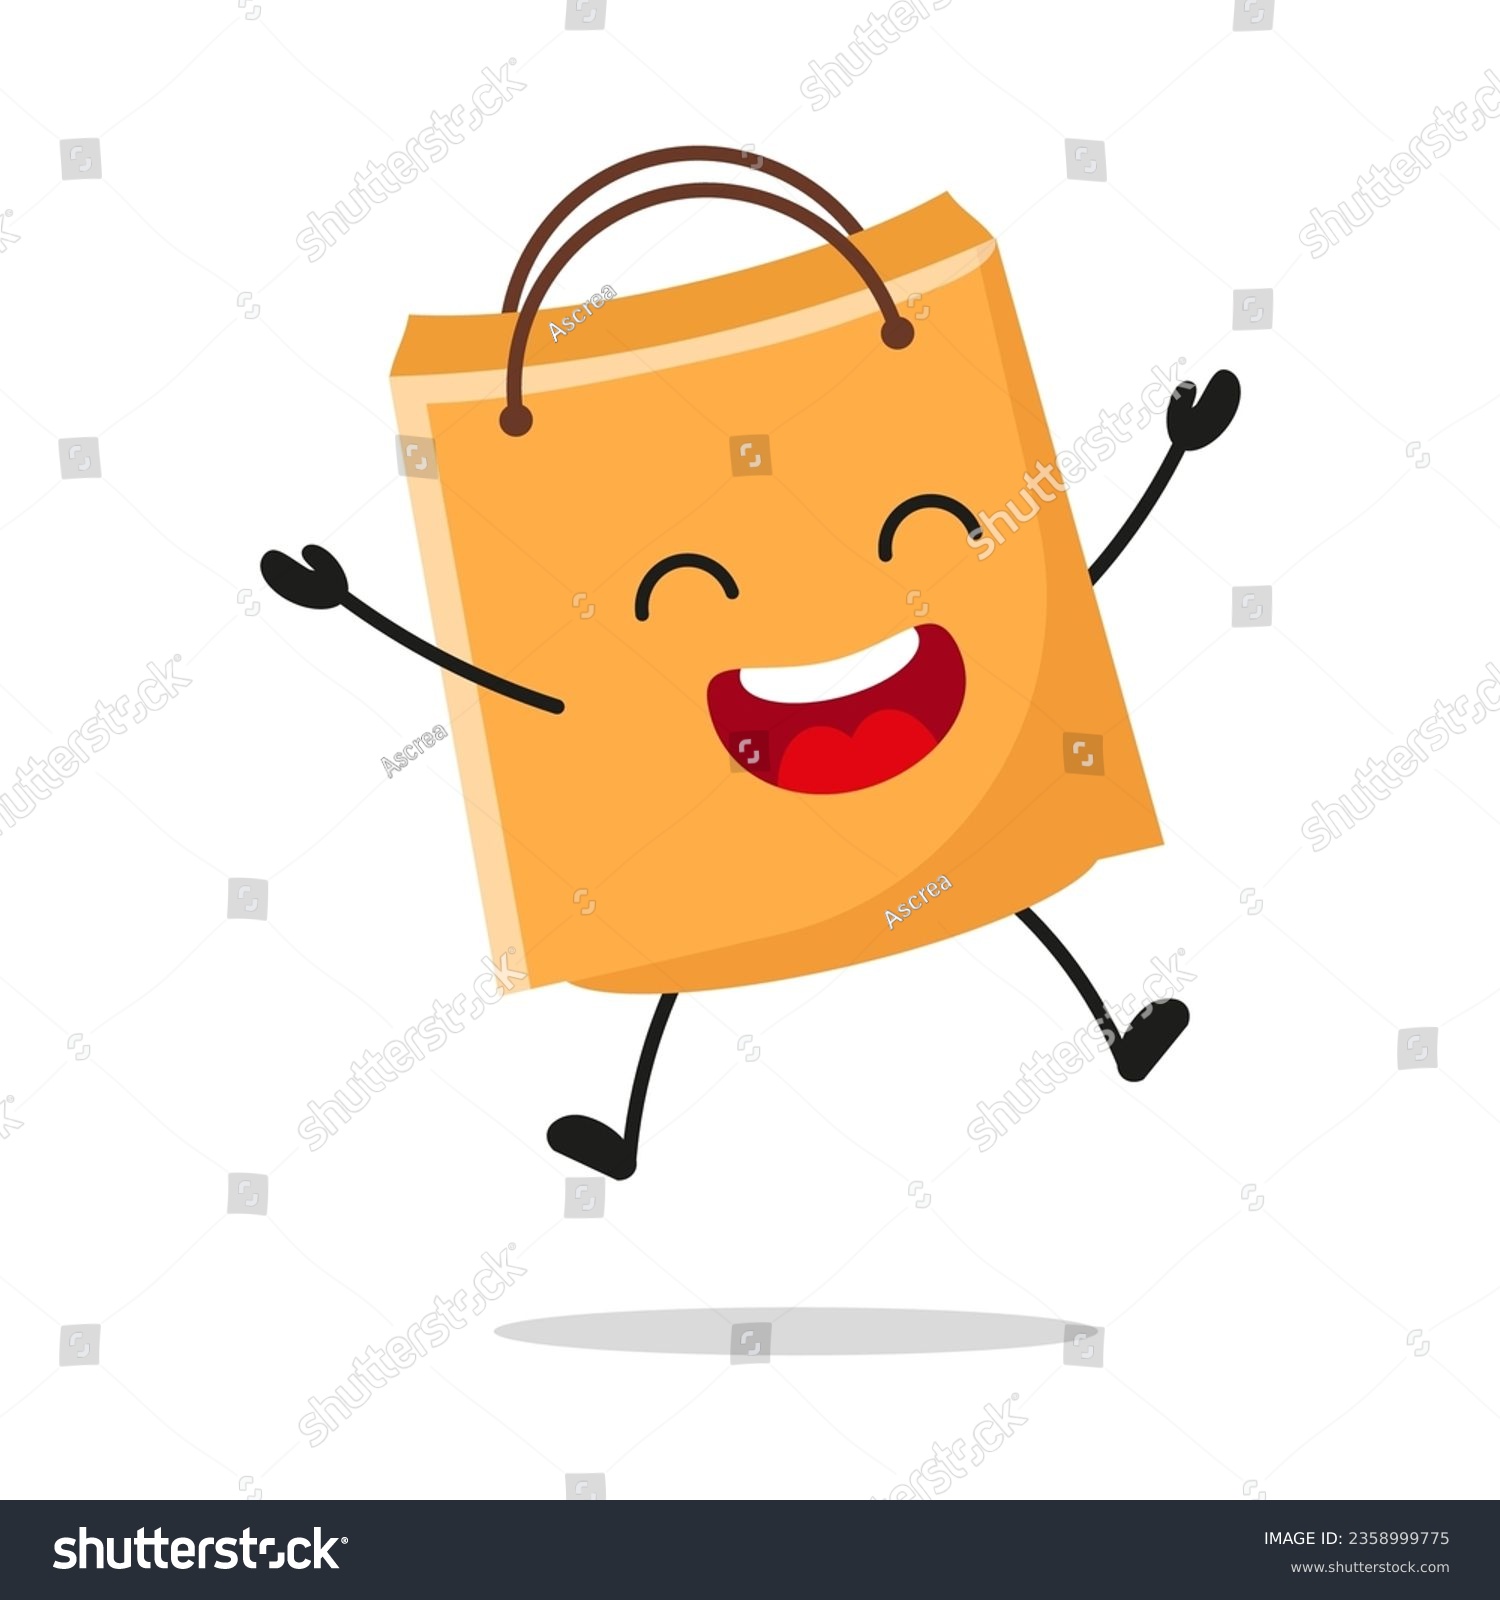 SVG of Cute happy shopping bag character. Funny victory jump celebration paper bag cartoon emoticon in flat style. bag emoji vector illustration svg